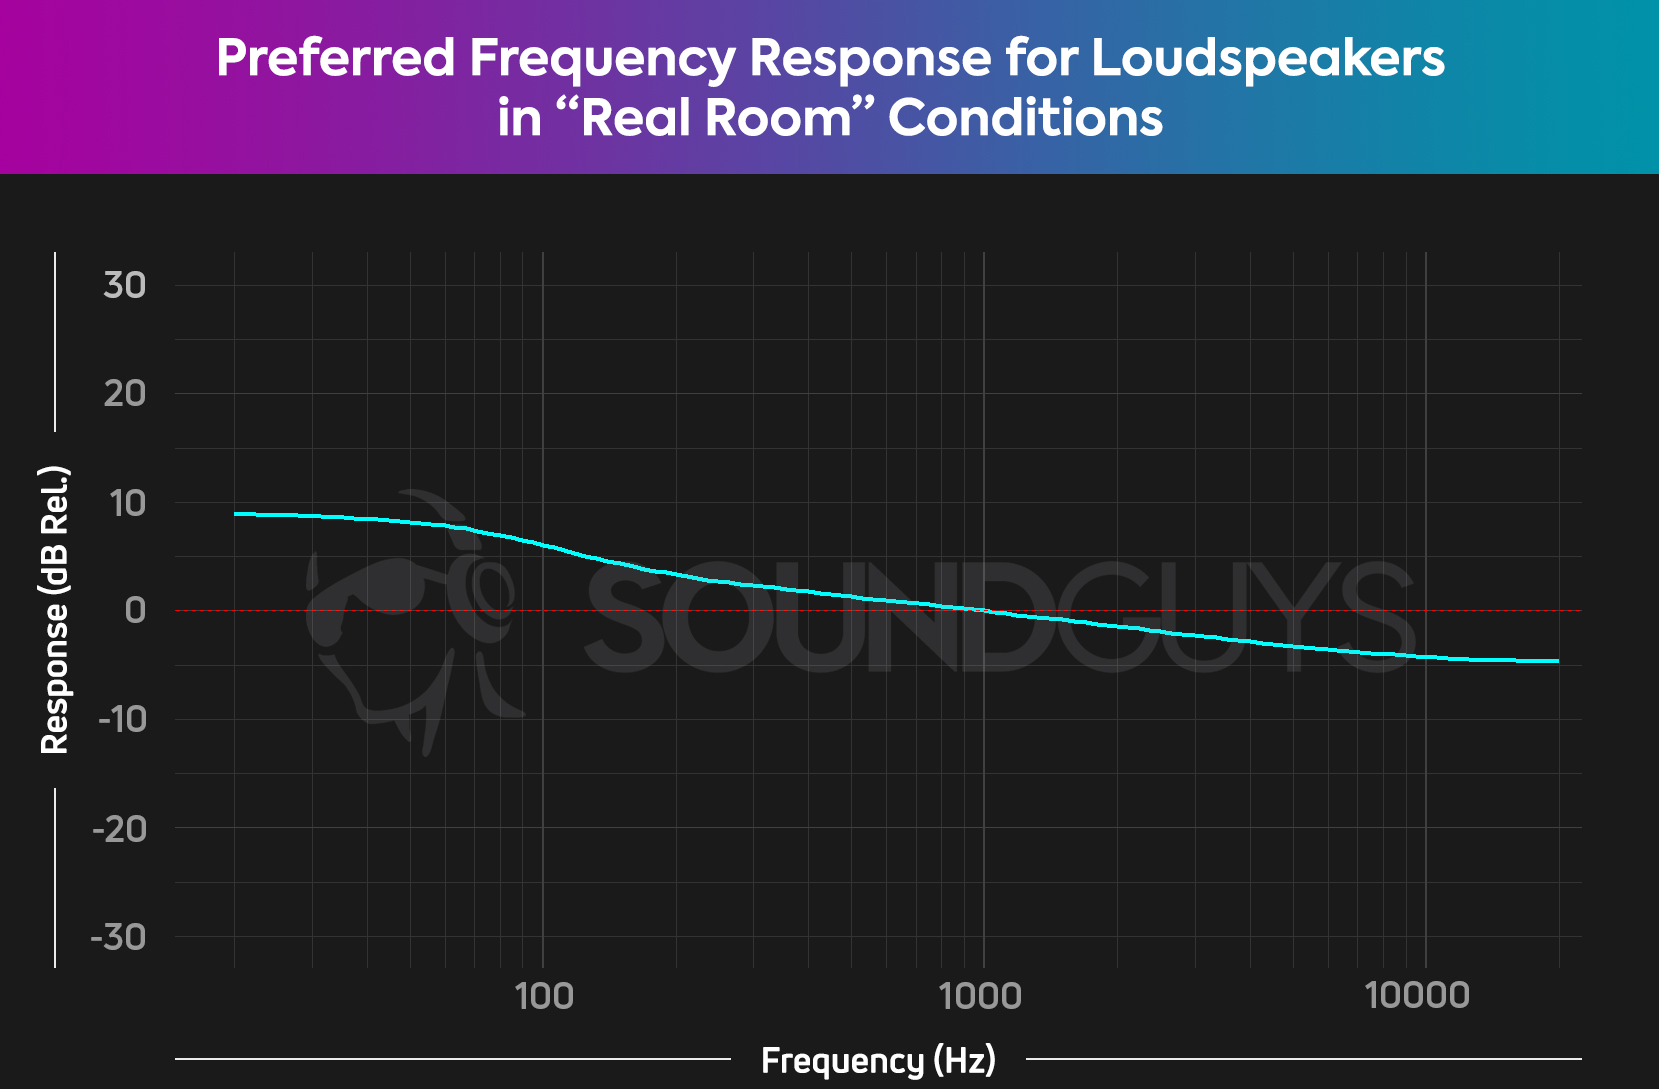 Chart showing the gentle downward sloping frequency response preferred by listeners to loudspeakers in rooms.